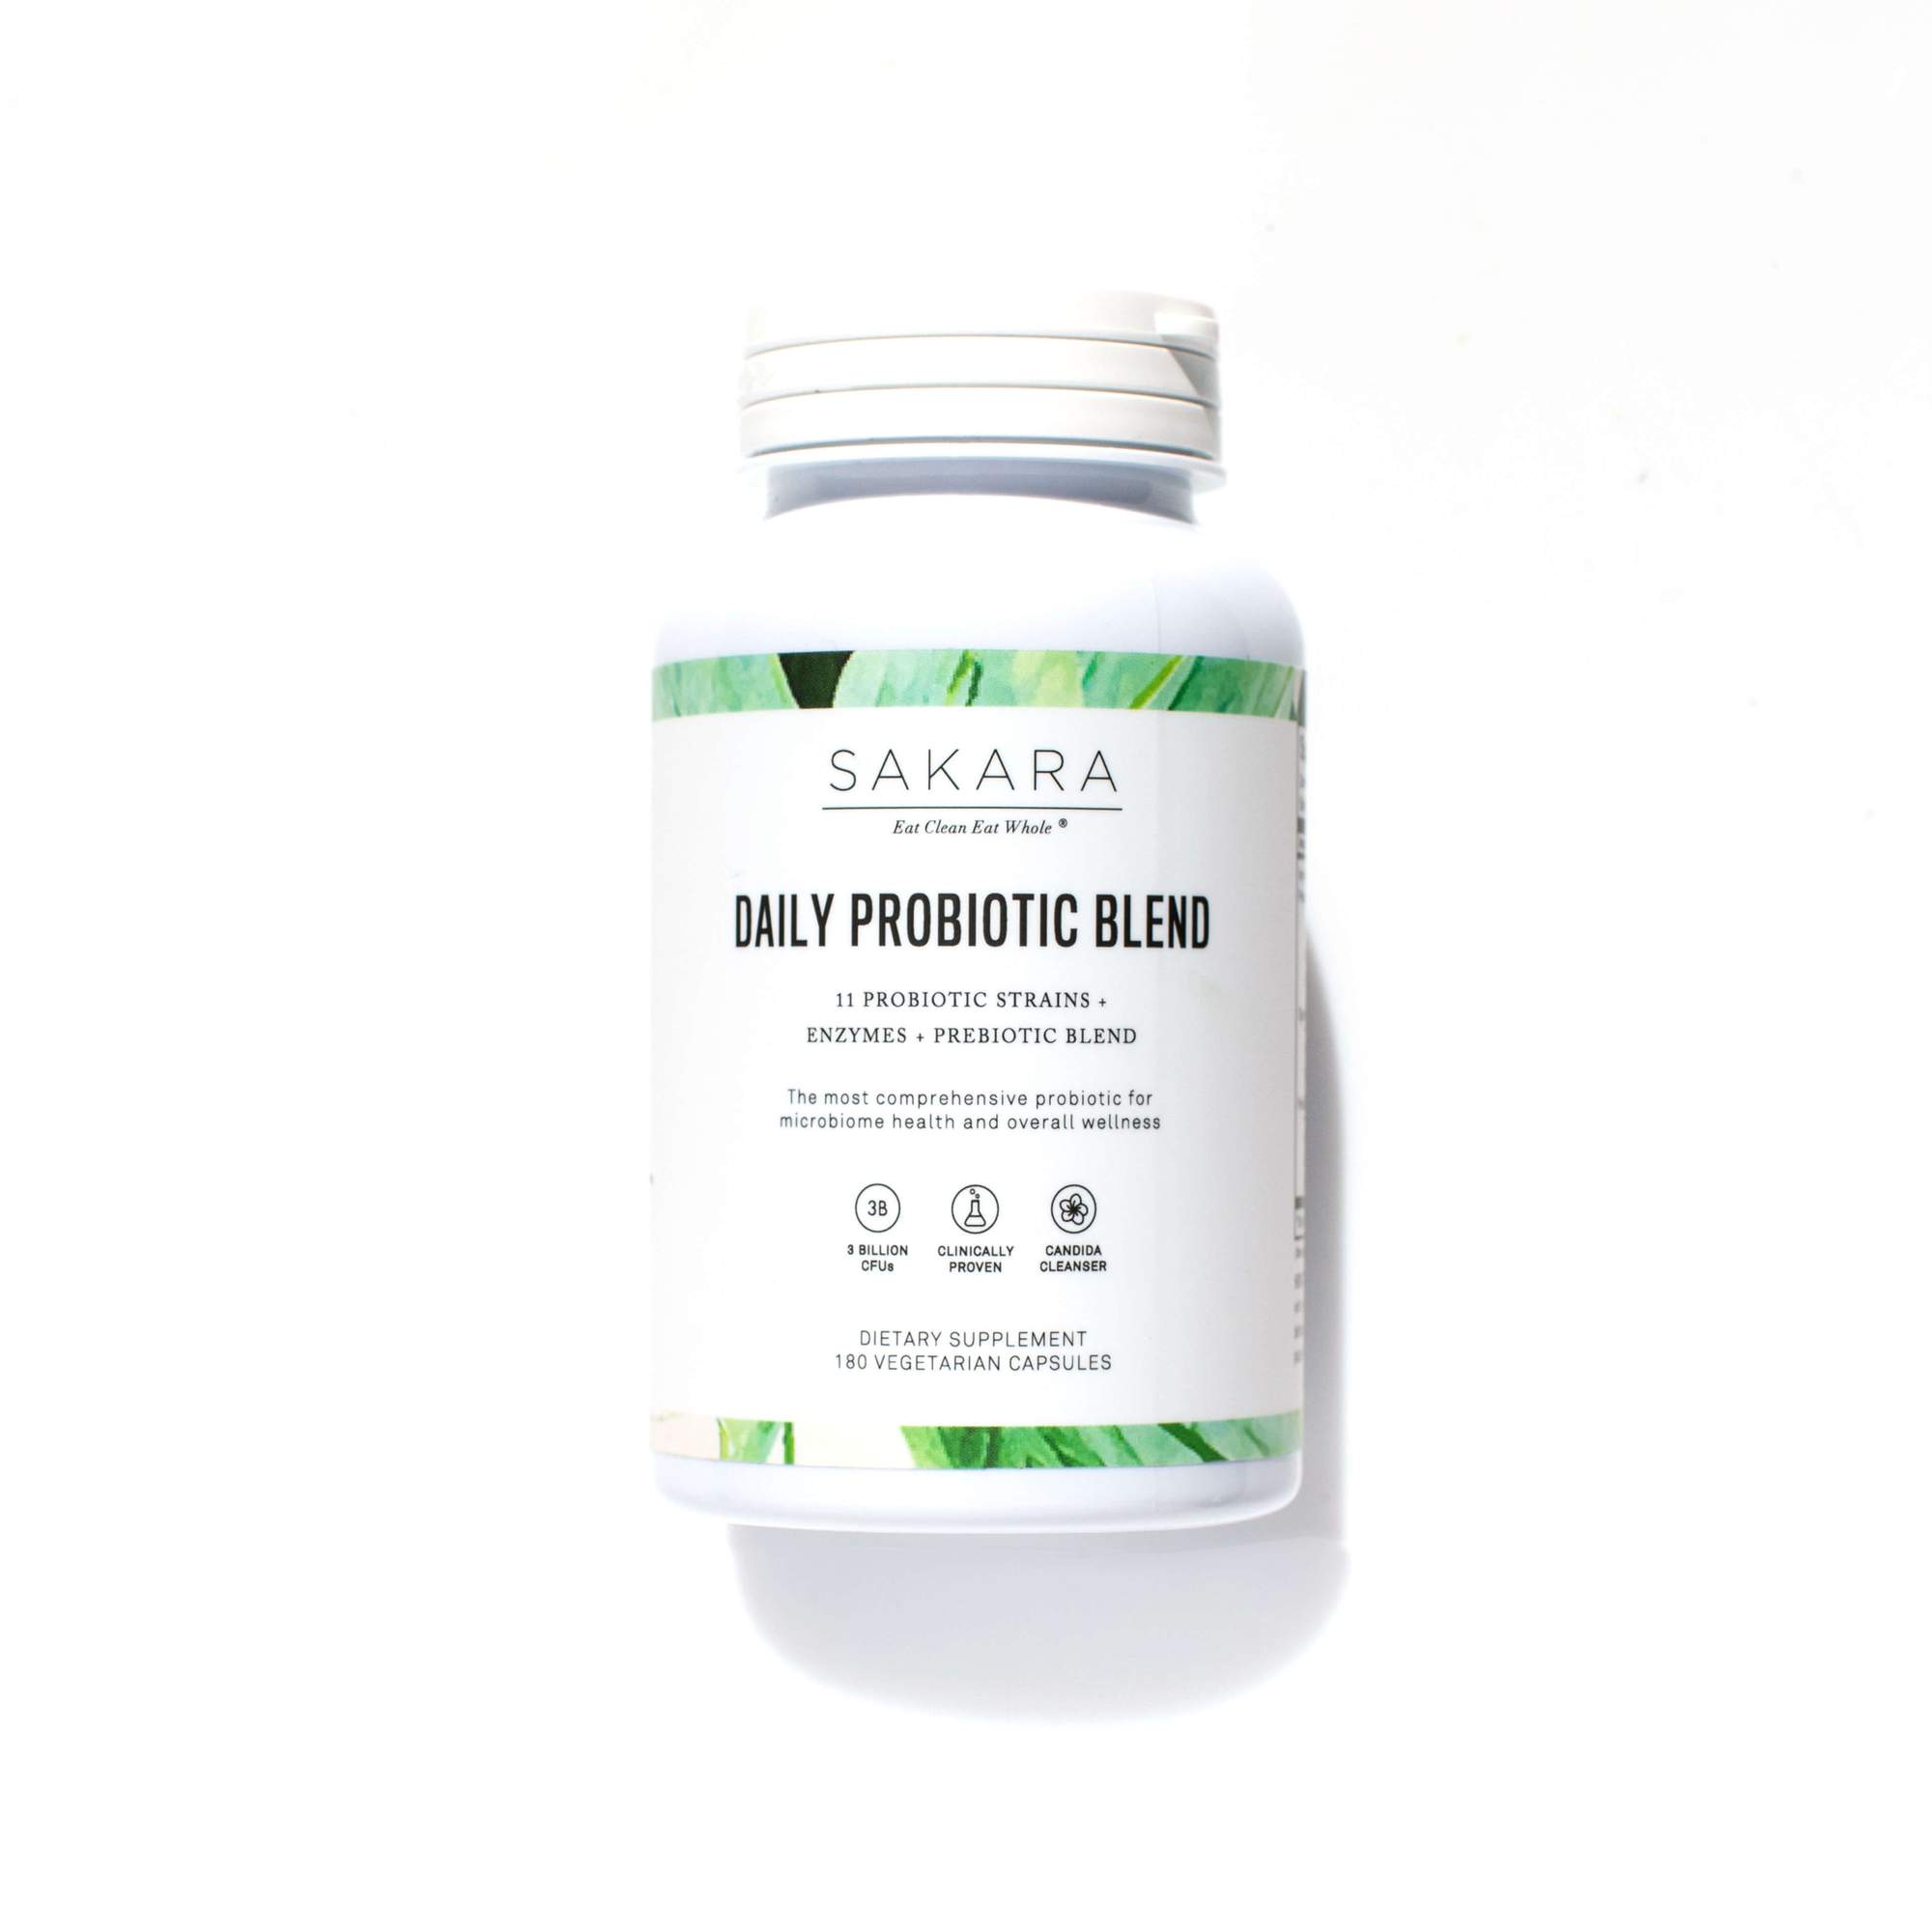 DAILY PROBIOTIC BLEND